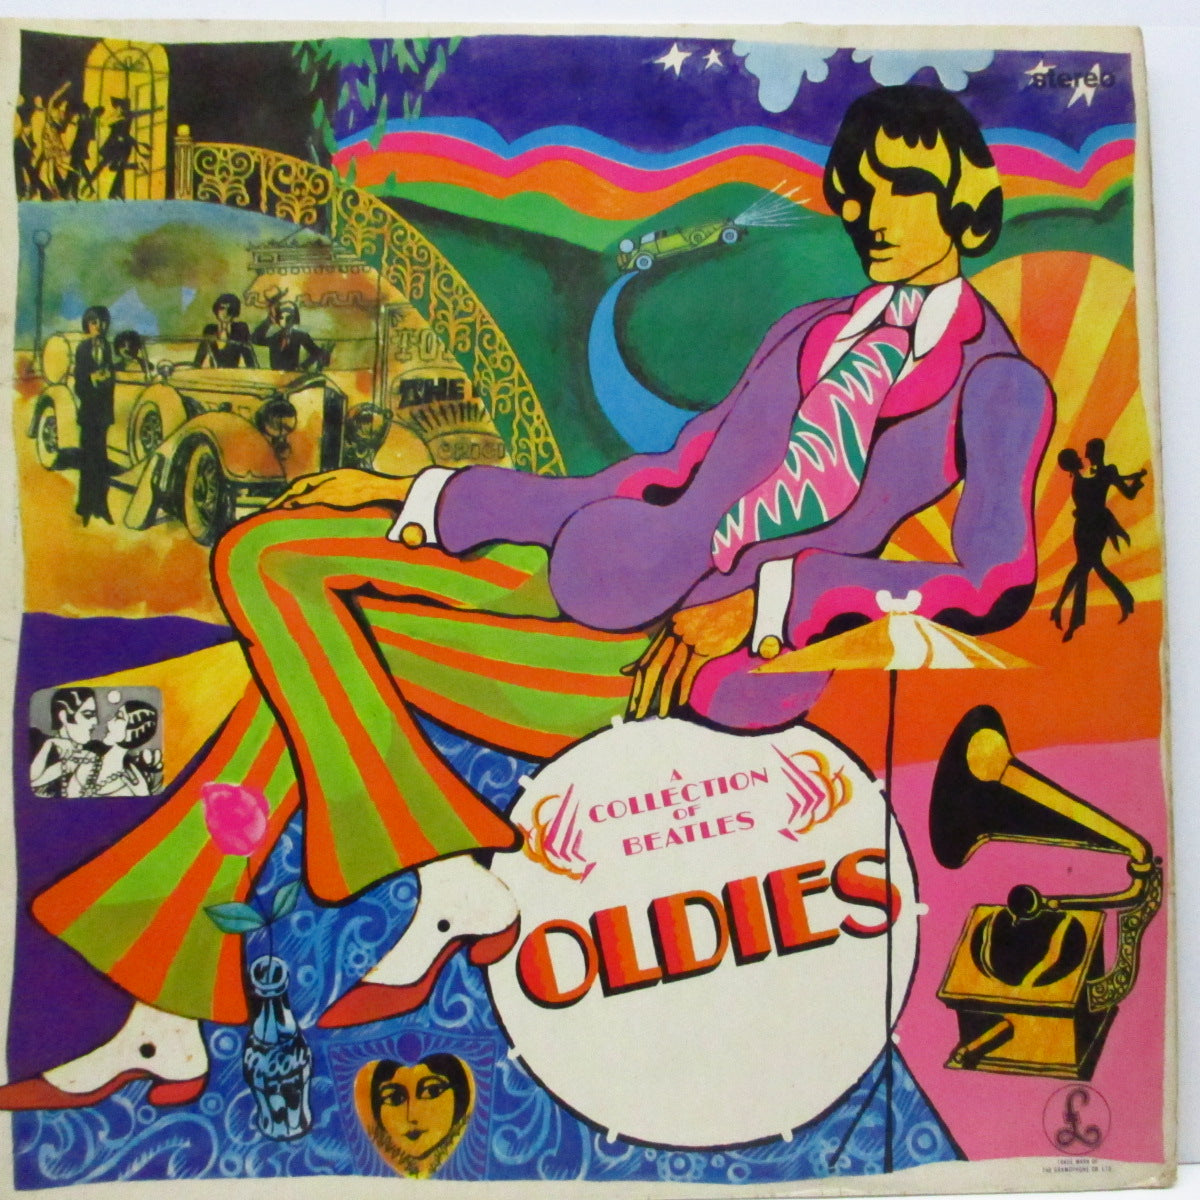 BEATLES (ビートルズ) - Collection Of Beatles Oldies (UK 初回